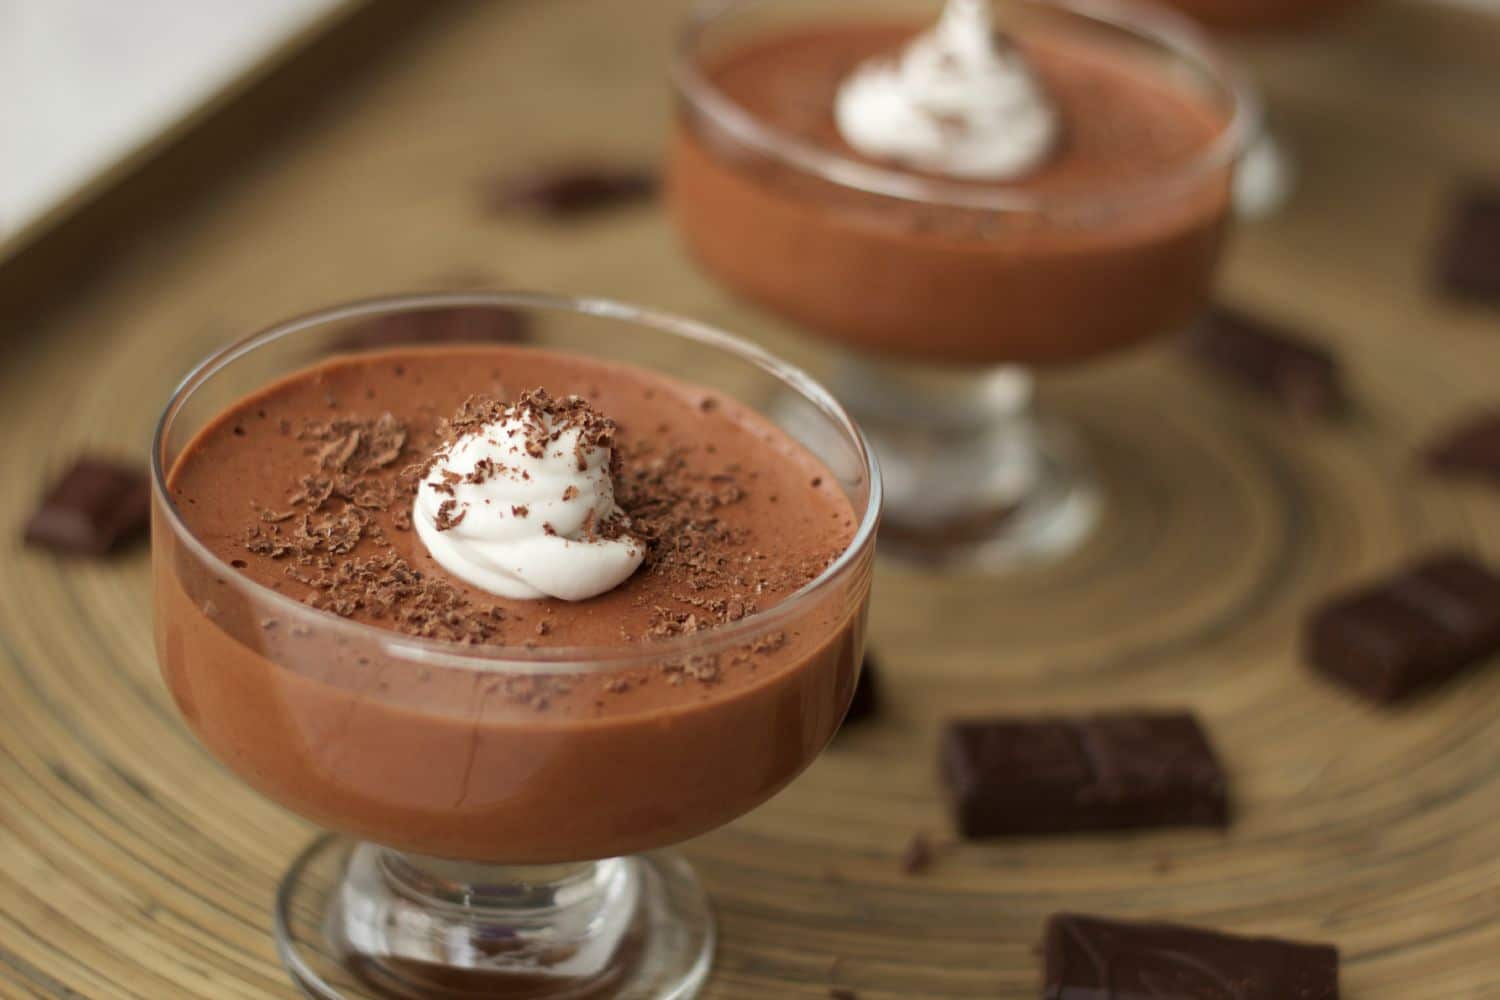 Recipes for chocolate mousse